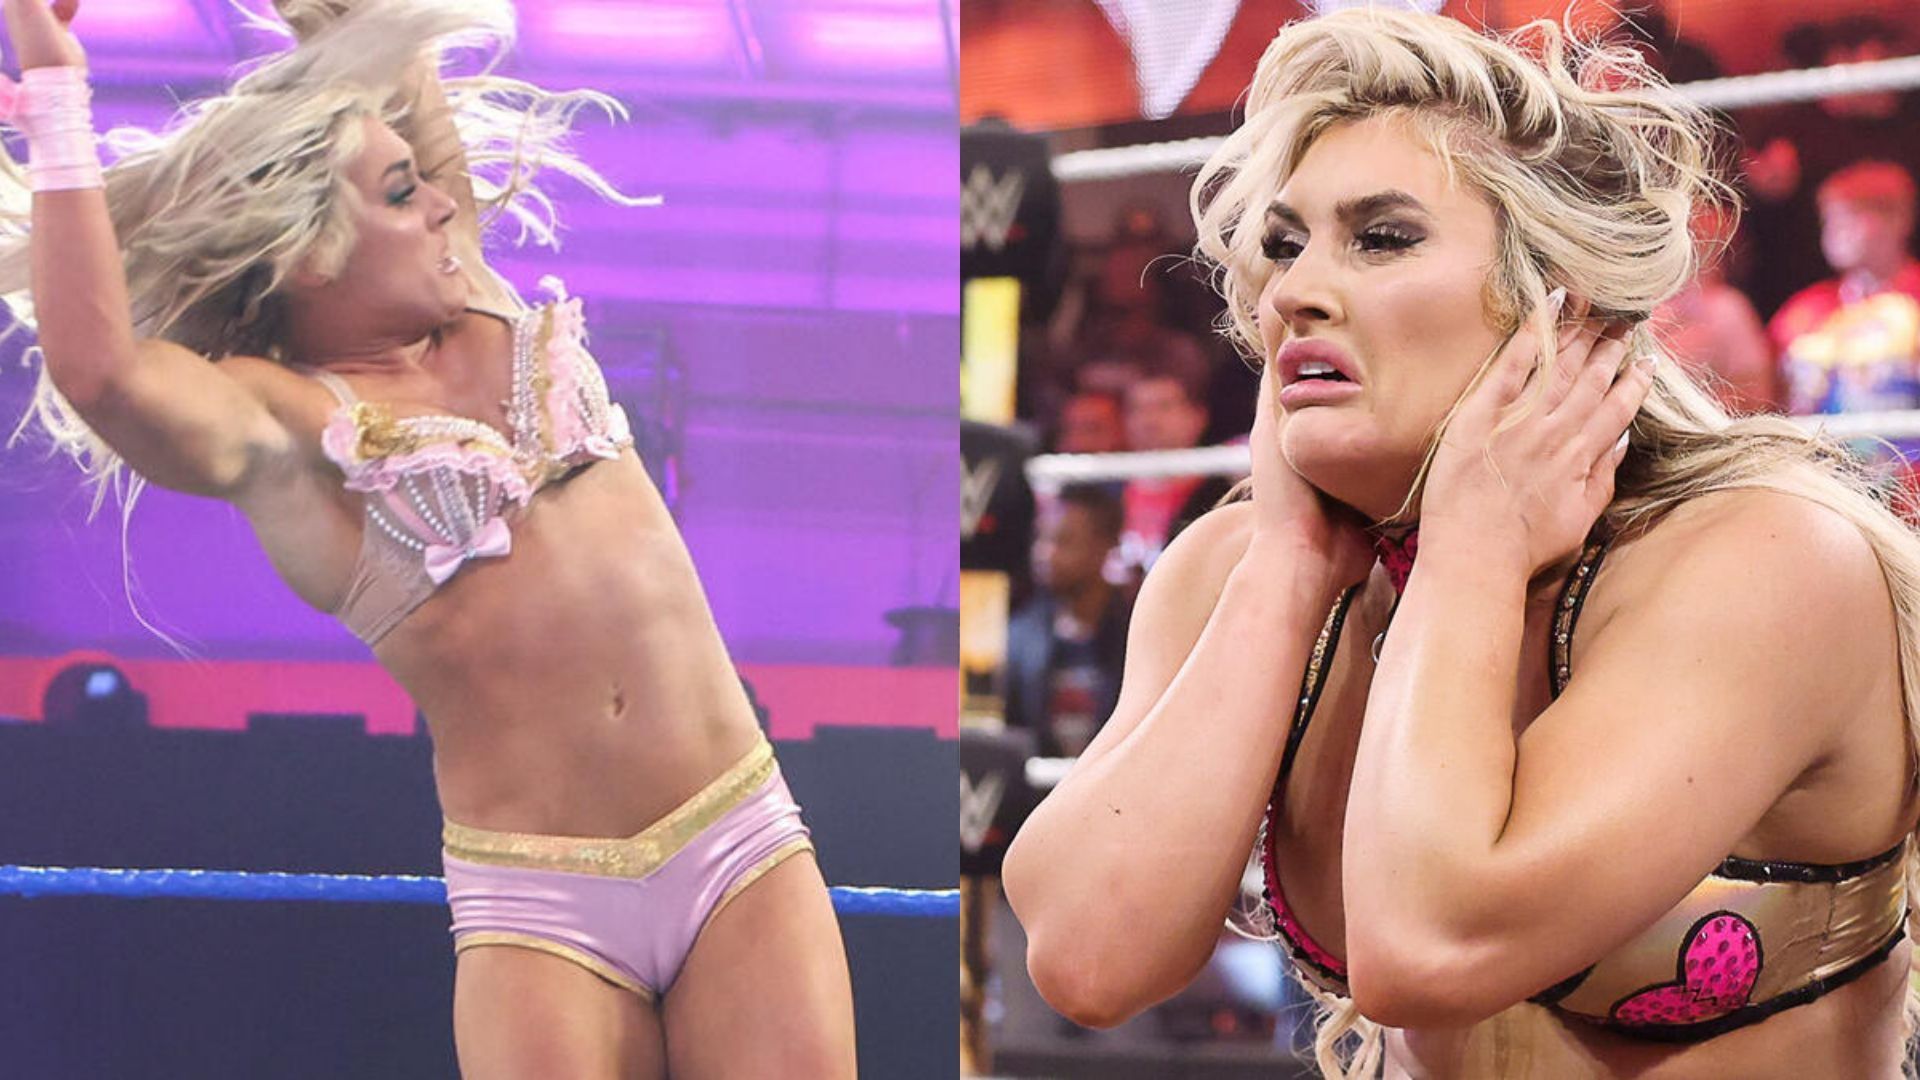 The WWE star has found herself in hot water at this time